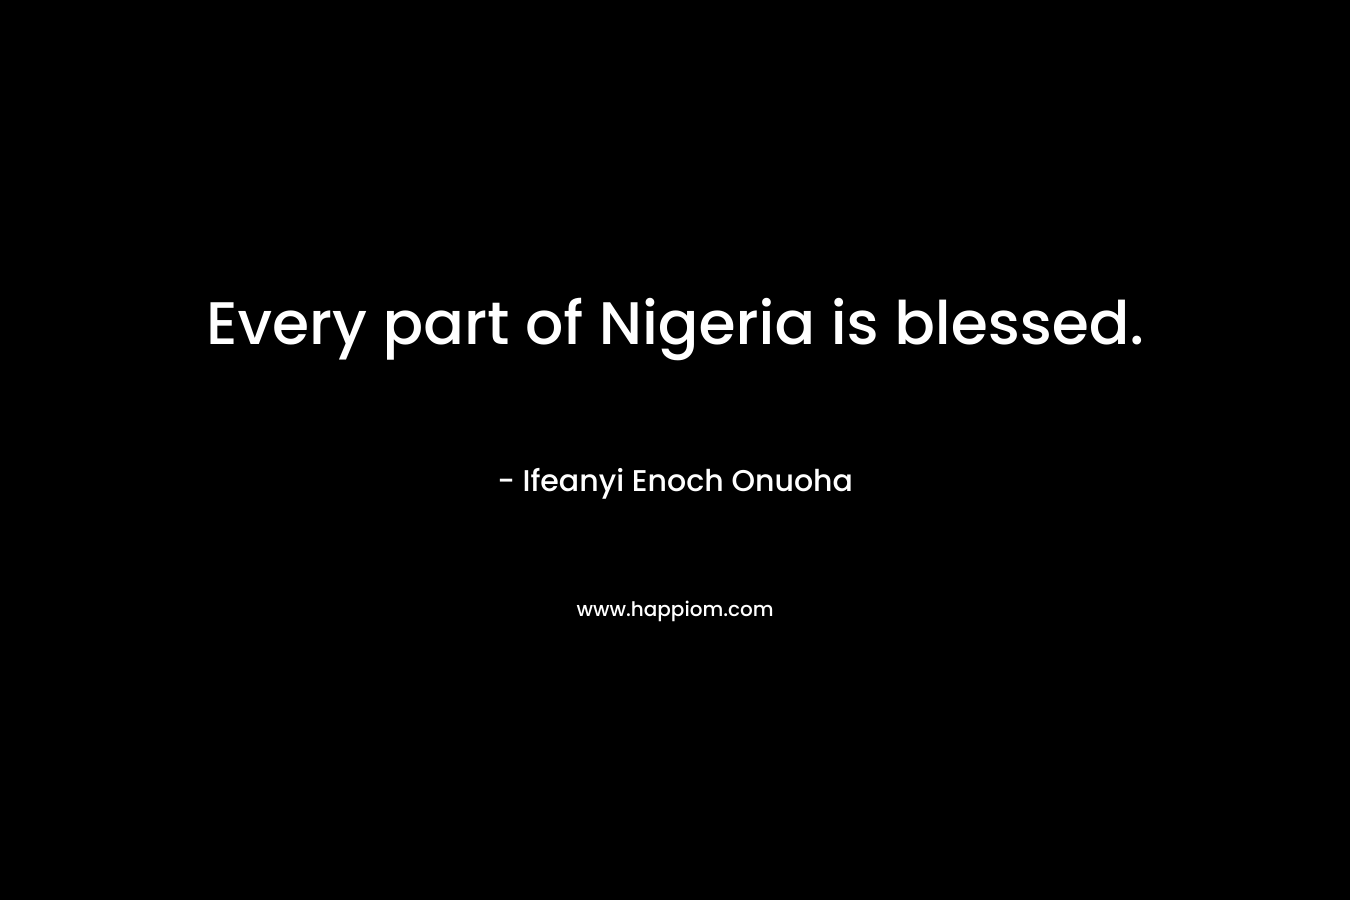 Every part of Nigeria is blessed. – Ifeanyi Enoch Onuoha